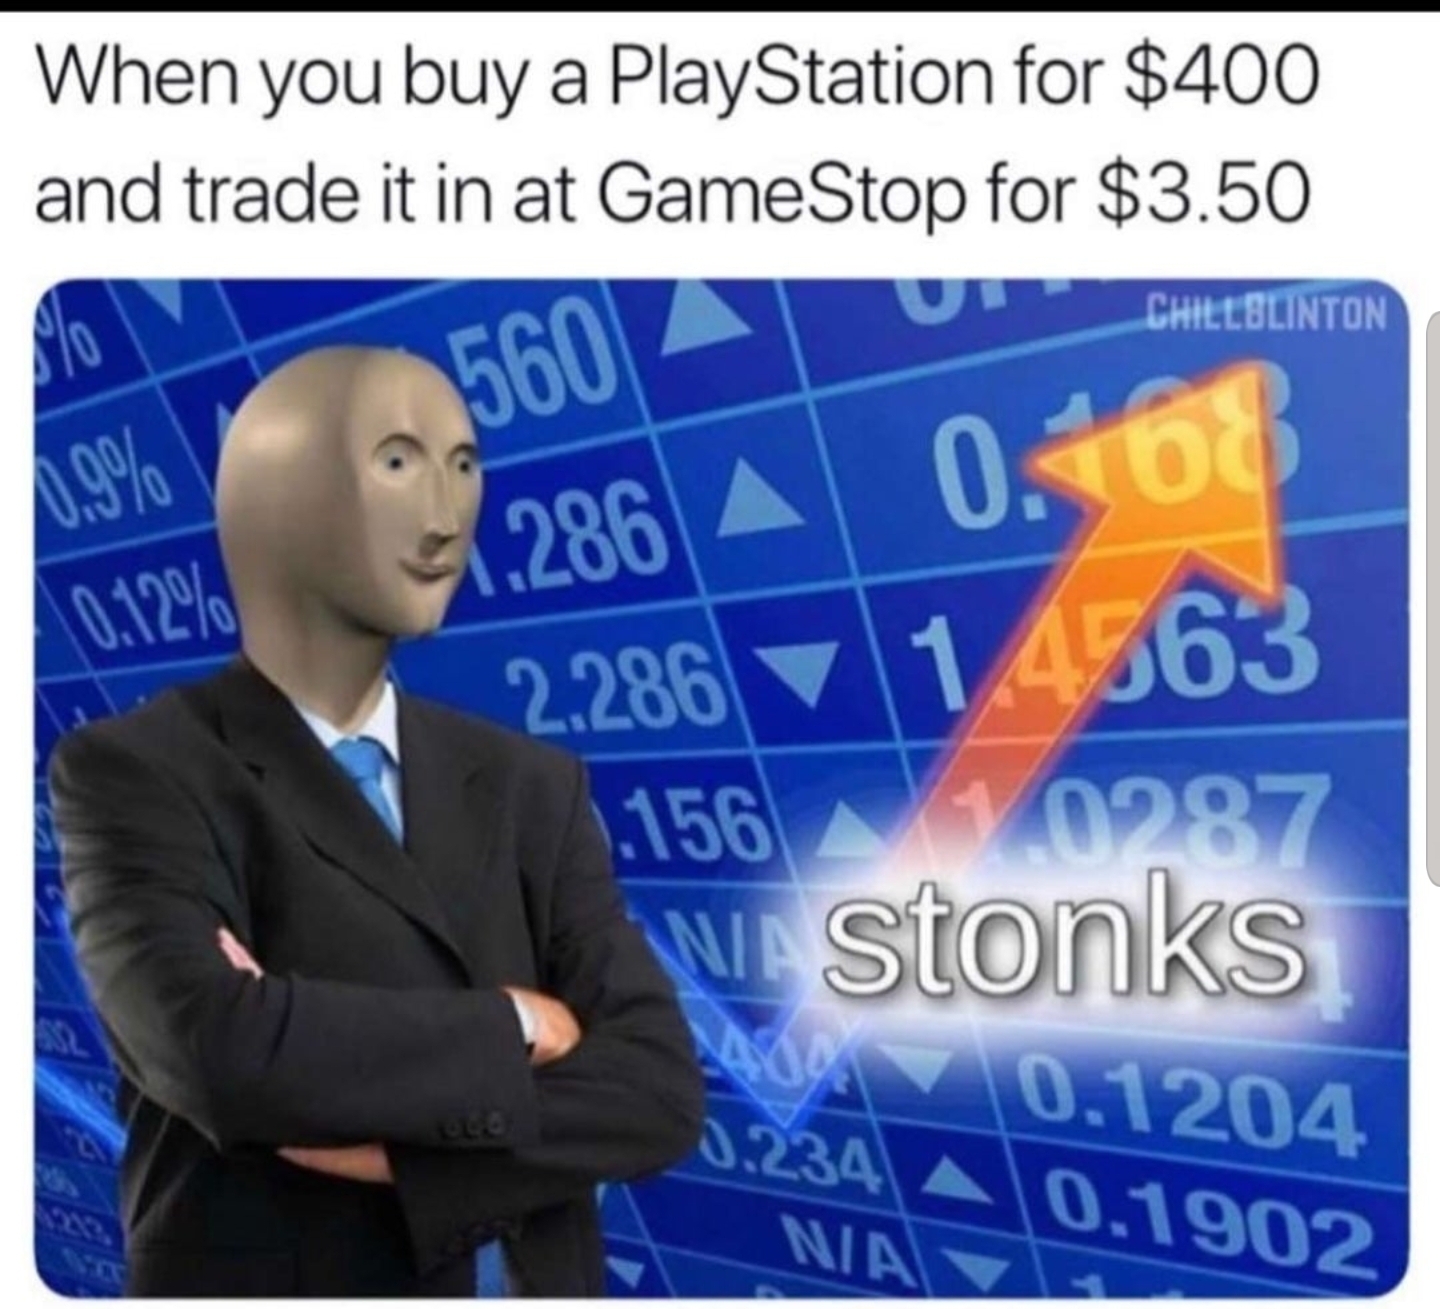 stonks meme - Meme - When you buy a PlayStation for $400 and trade it in at GameStop for $3.50 U C Hillslinton 560 5.286 A 2.286 0.168 1.4563 .156 0287 Wa stonks 0.1204 0.234 Ao NAS10.1902